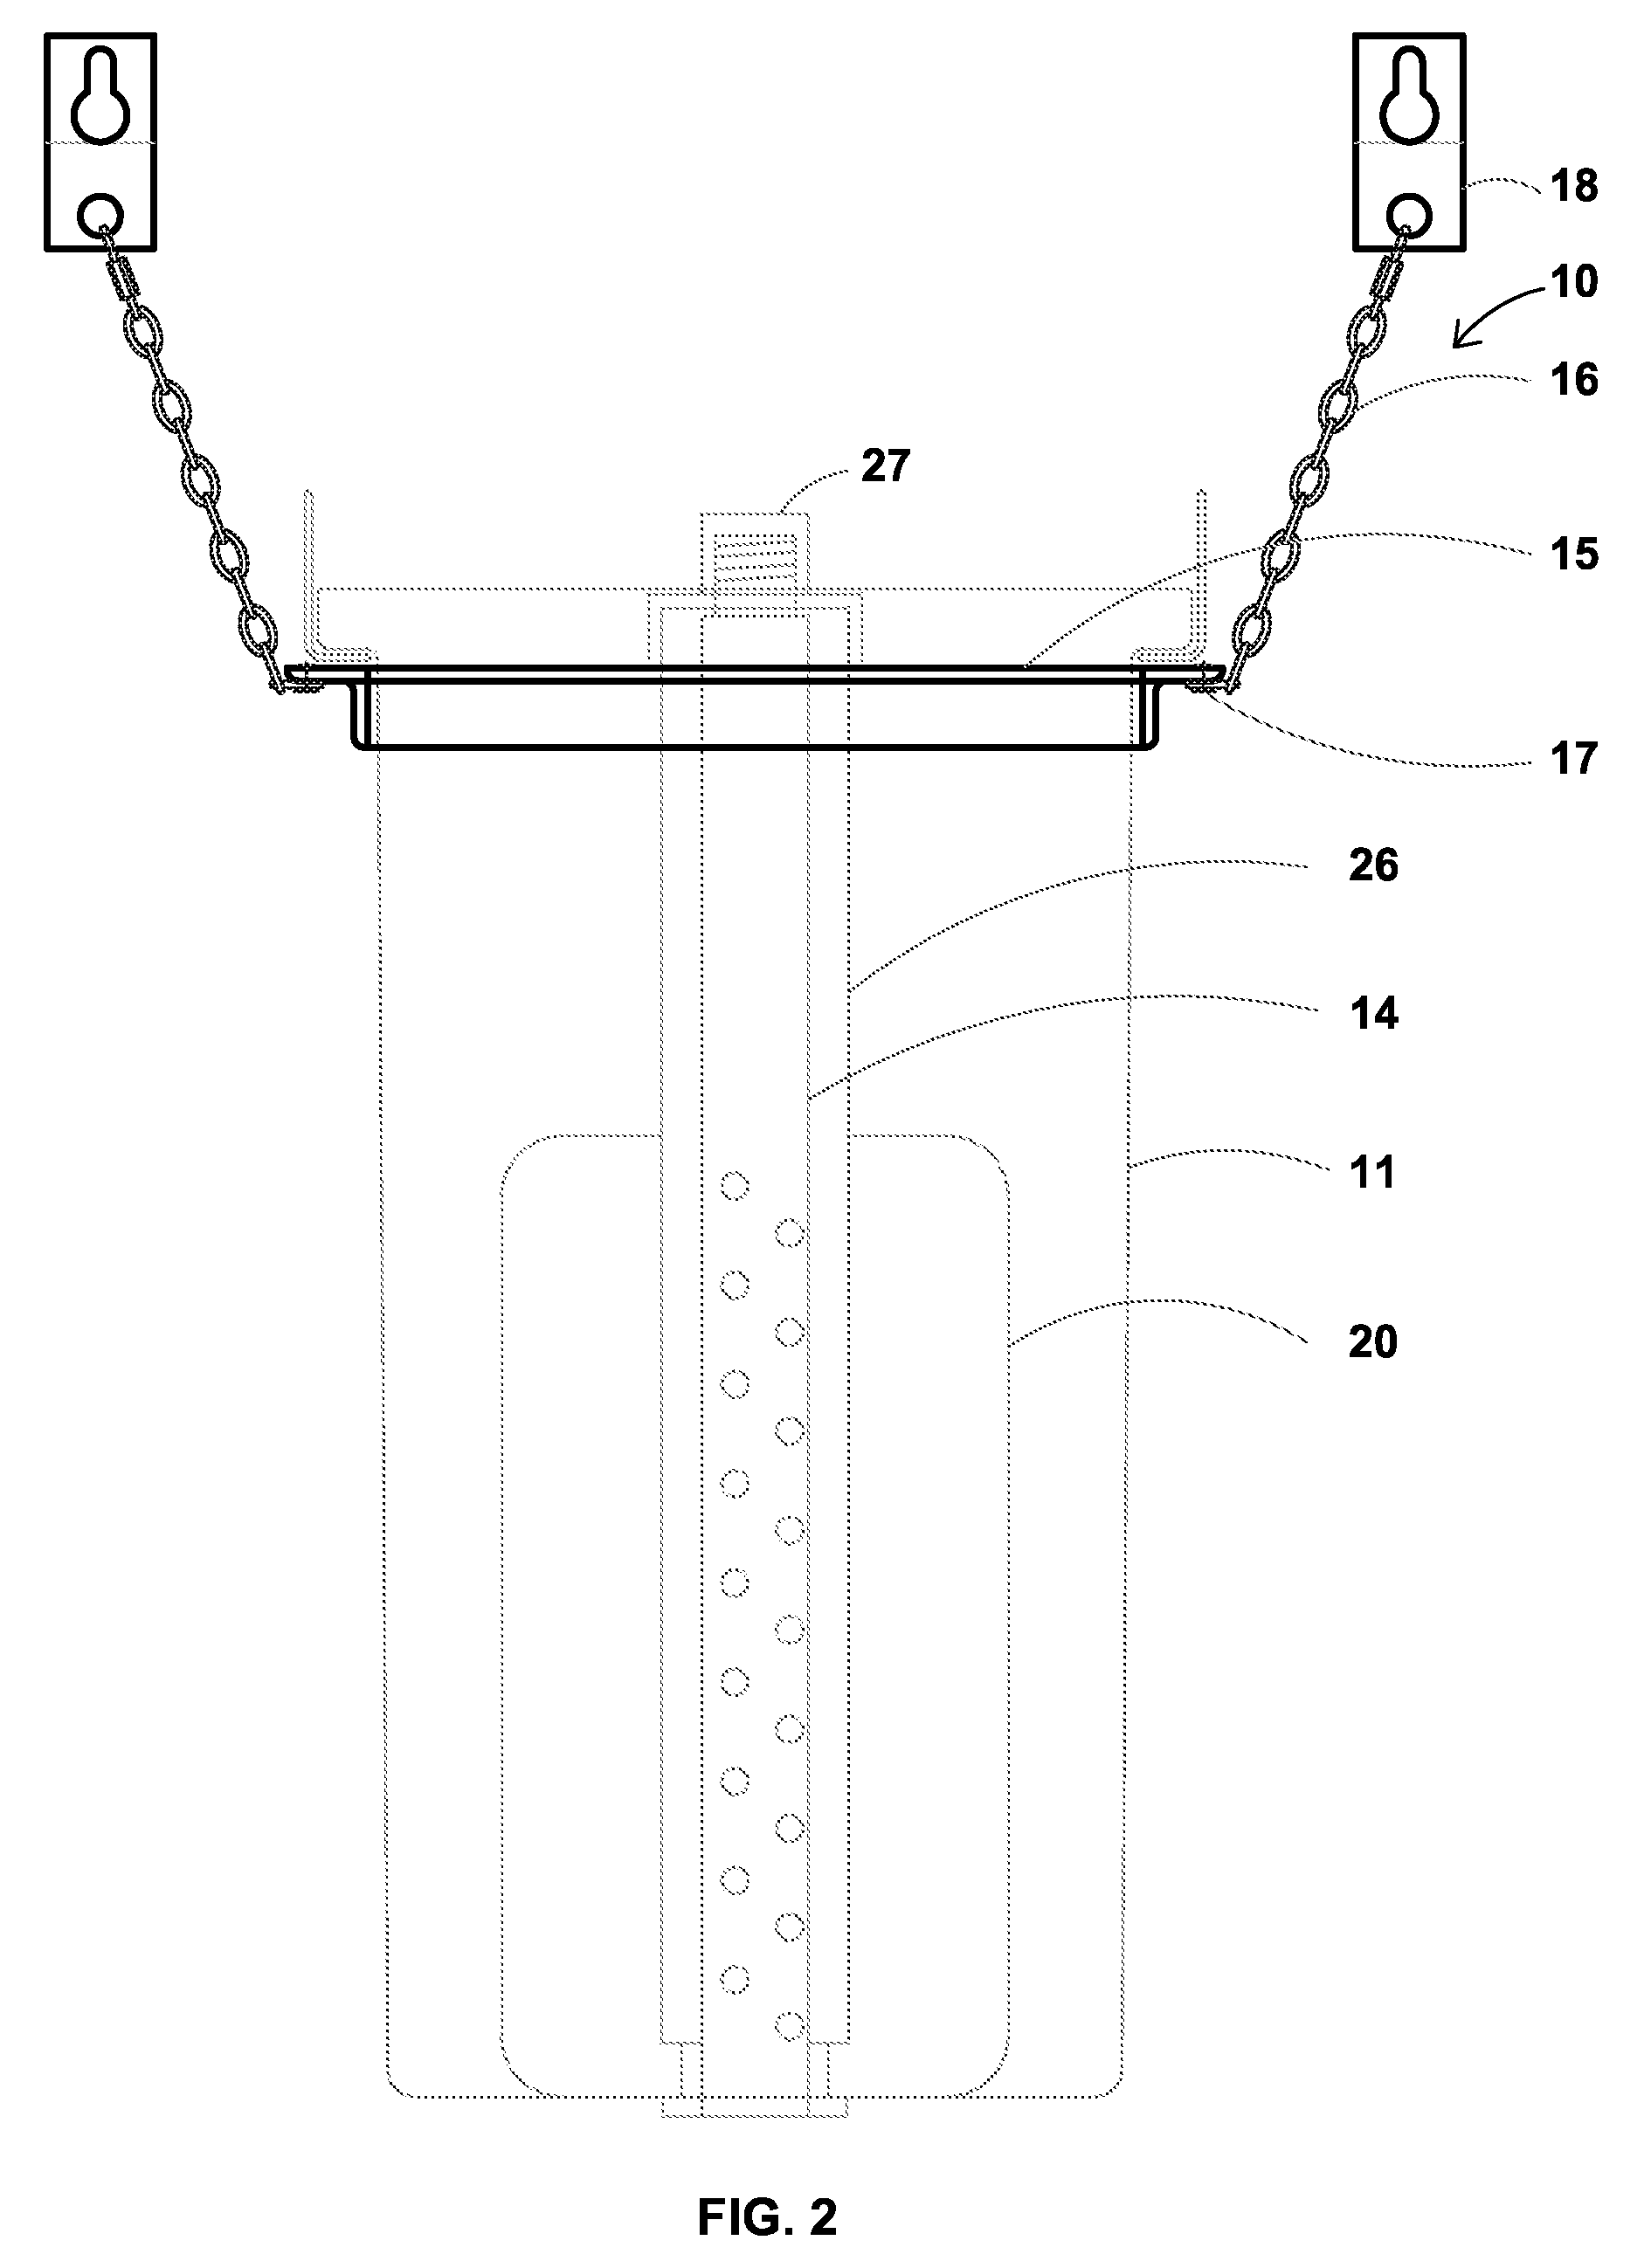 Catch basin filter absorber apparatus for water decontamination